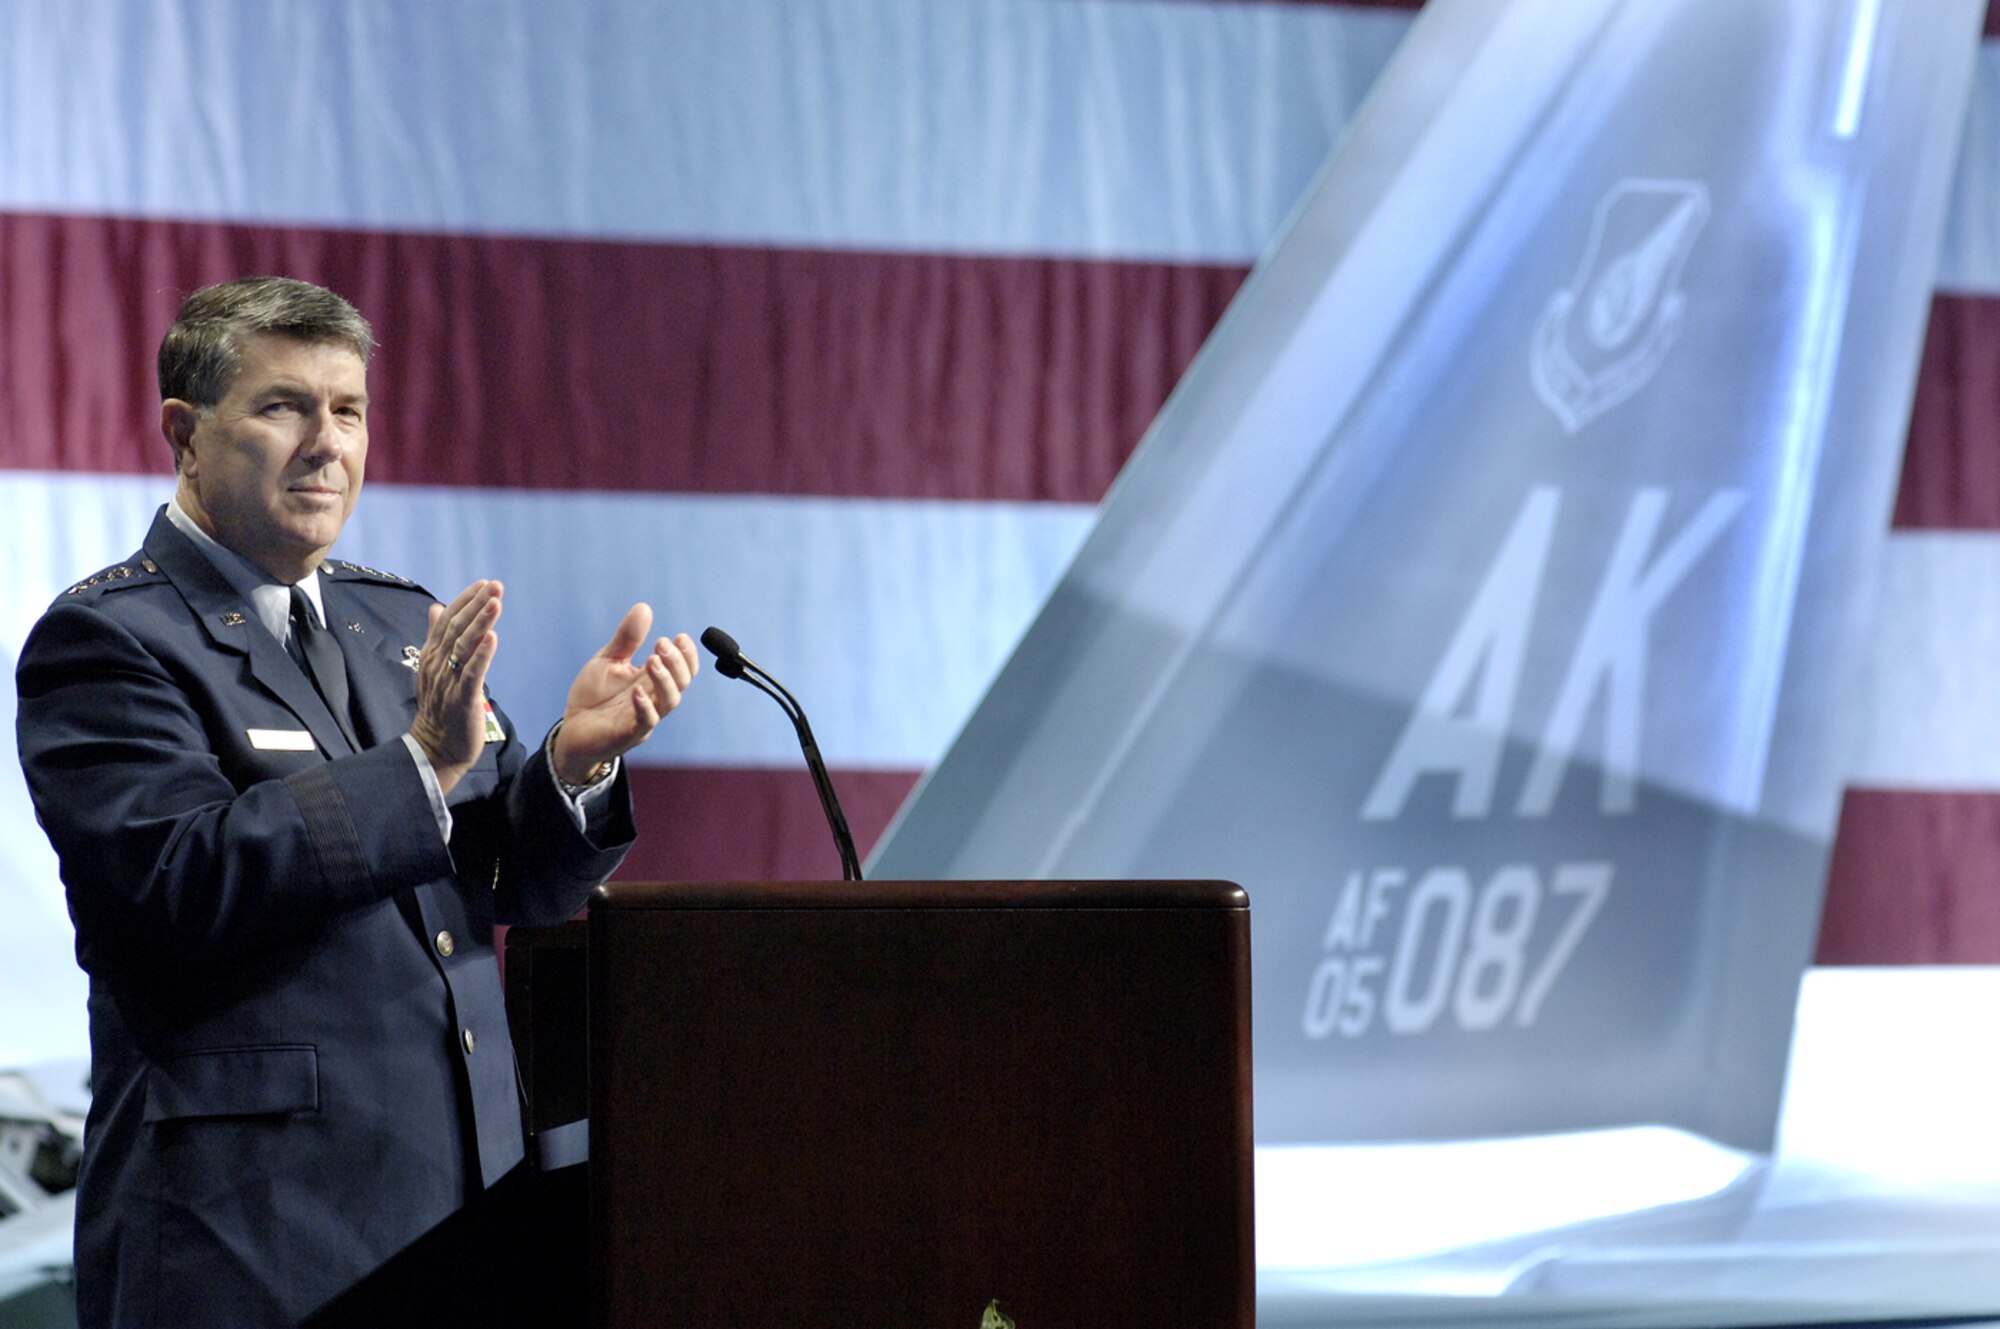 Gen. Paul V. Hester speaks during the acceptance ceremony for Pacific Air Force's first F-22 Raptor Feb 12 at Marietta, Ga. General Hester is the Pacific Air Forces commander. This F-22 is the first of several that will be assigned to PACAF at Elmendorf Air Force Base, Alaska. The F-22's combination of stealth, supercruise, maneuverability, and integrated avionics, coupled with improved supportability, represents an exponential leap in warfighting capabilities. (U.S. Air Force photo/John Rossino) 